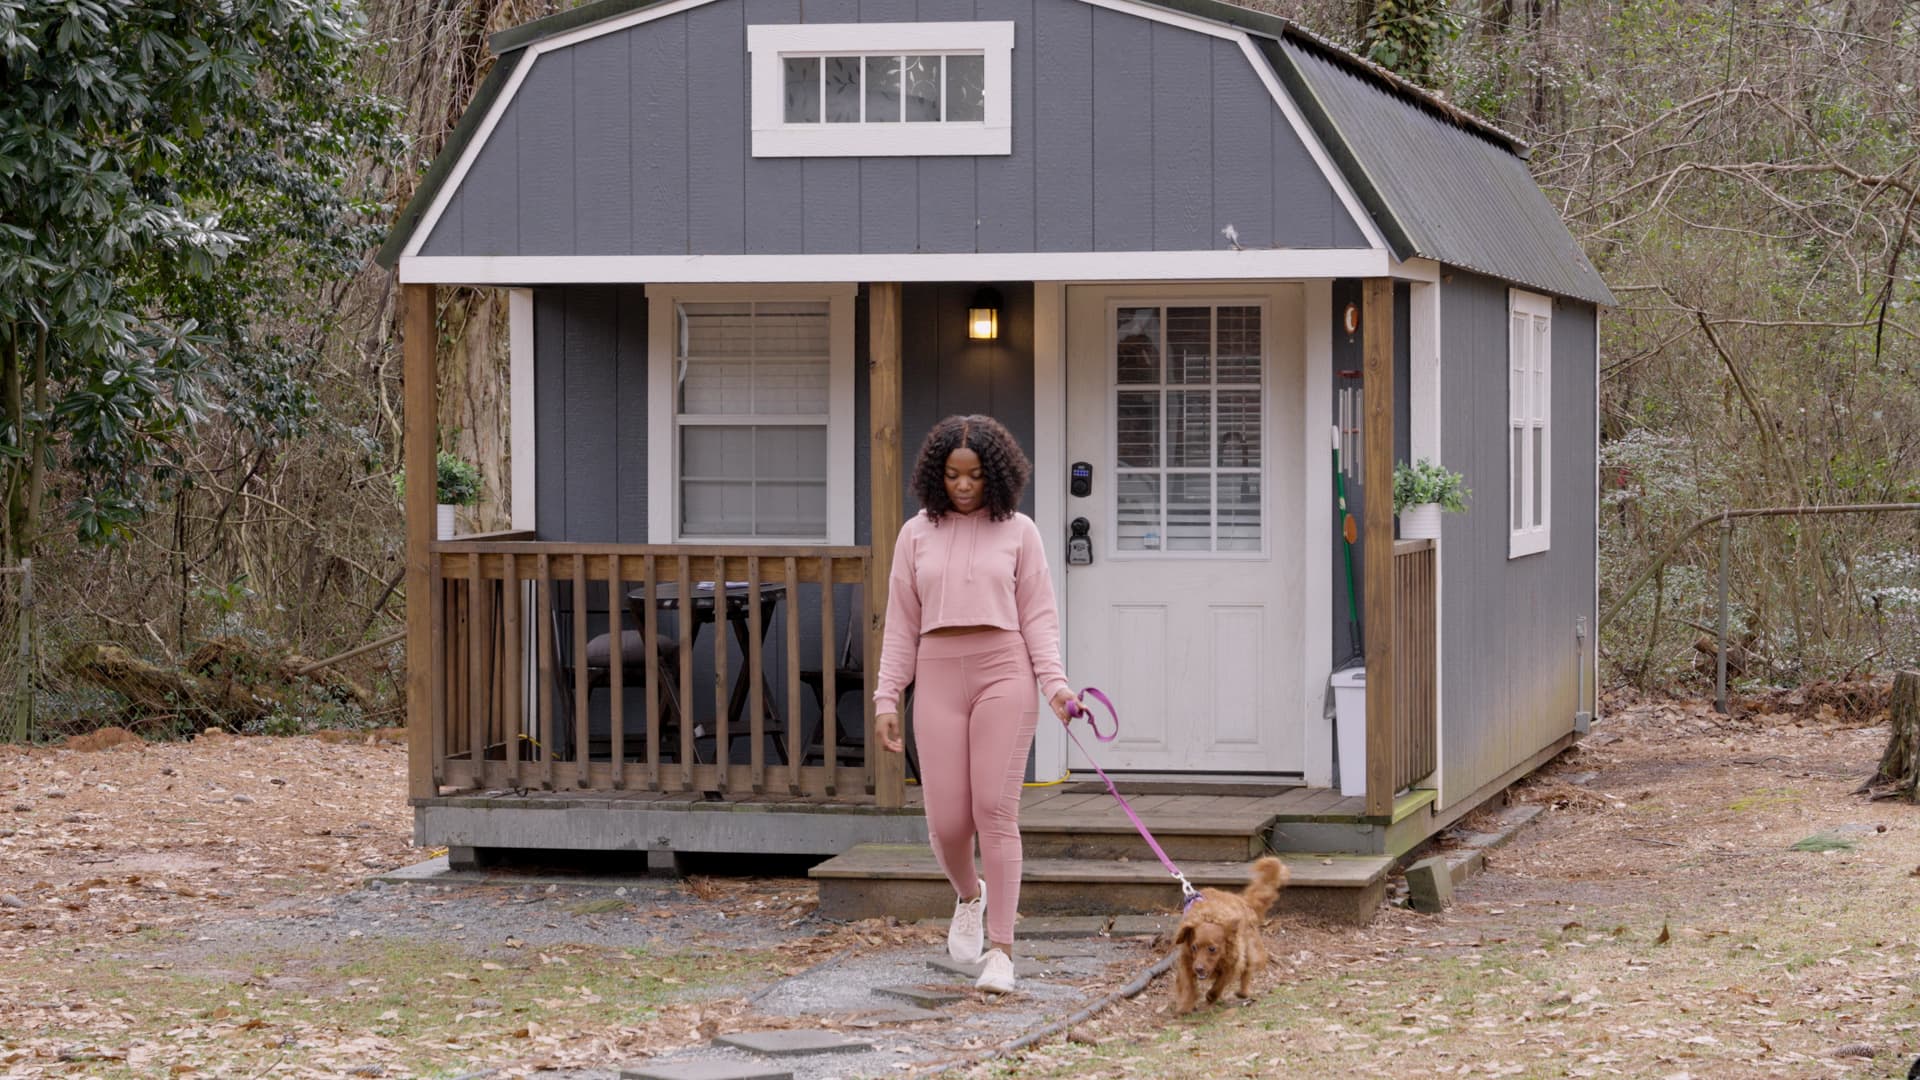 26-year-old pays $0 to live in a 'luxury tiny home' she built in